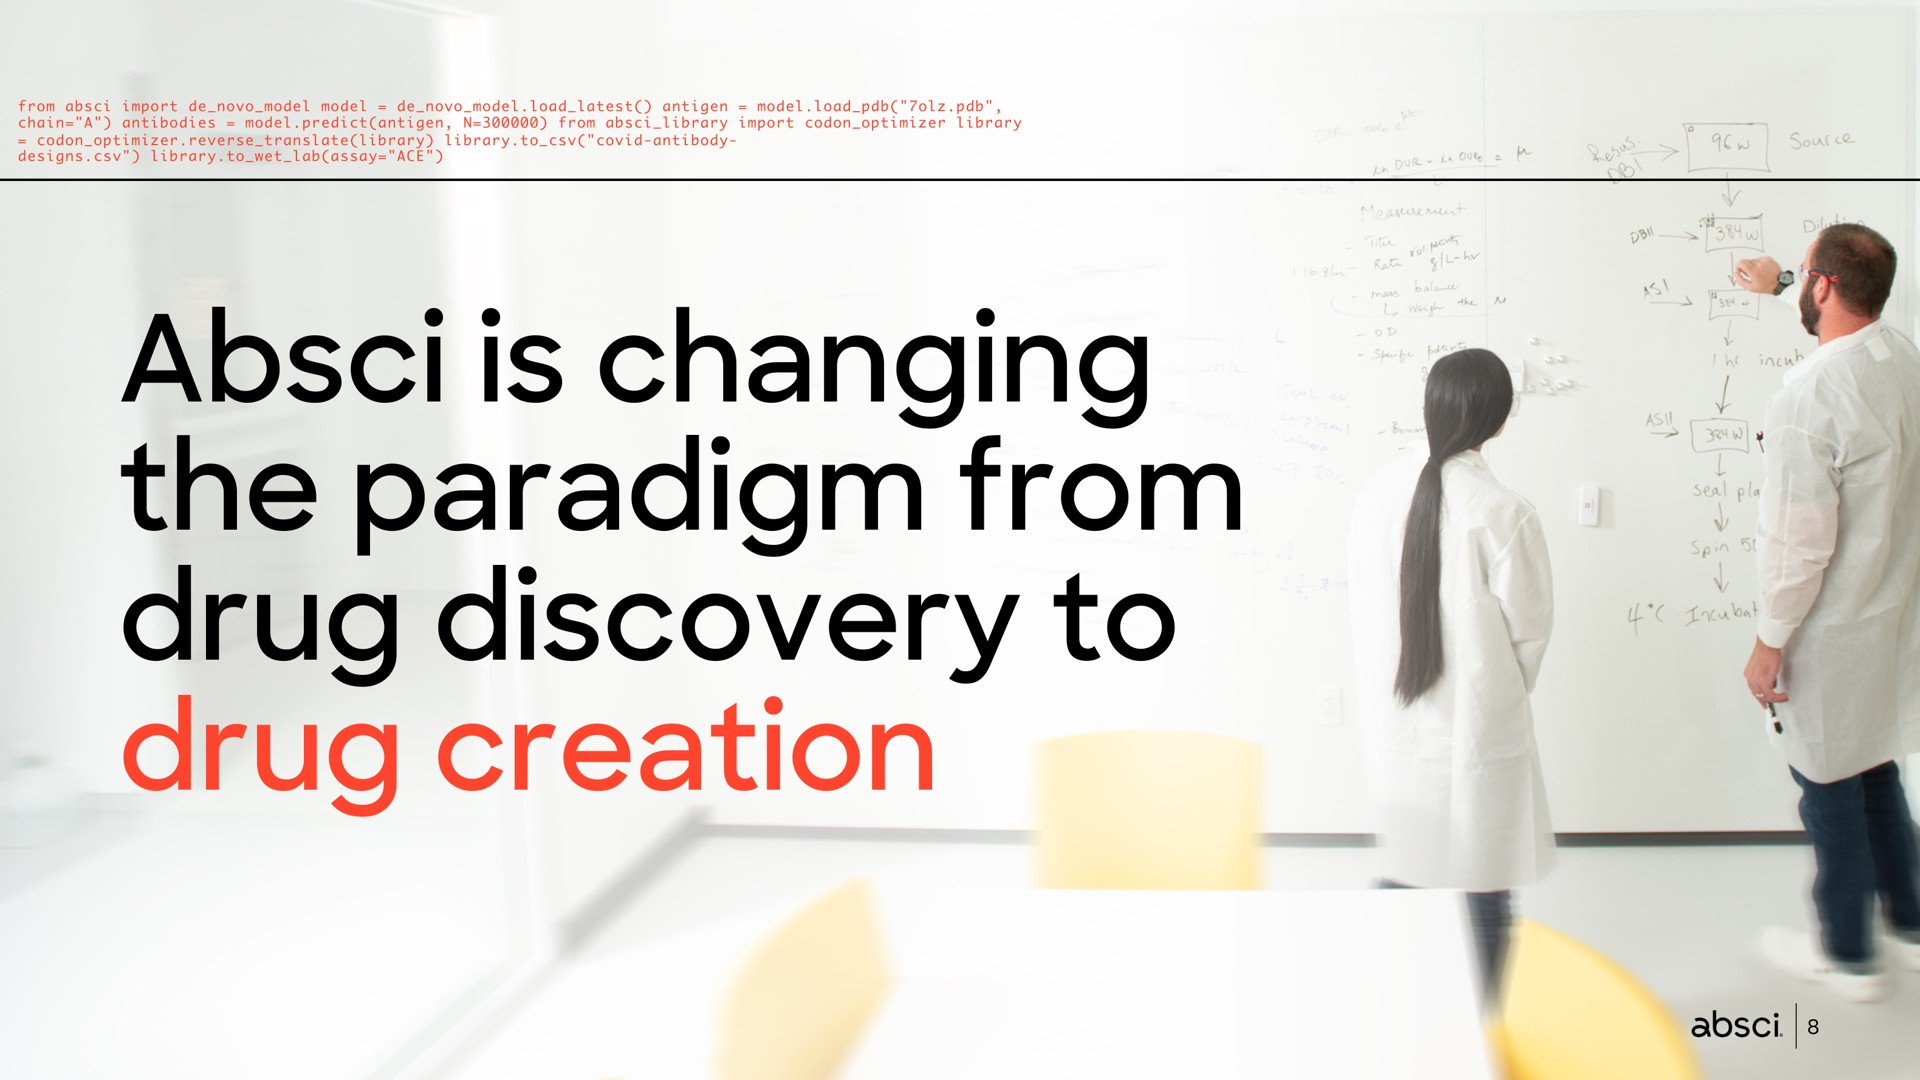 is changing the paradigm from drug discovery to drug creation | Absci